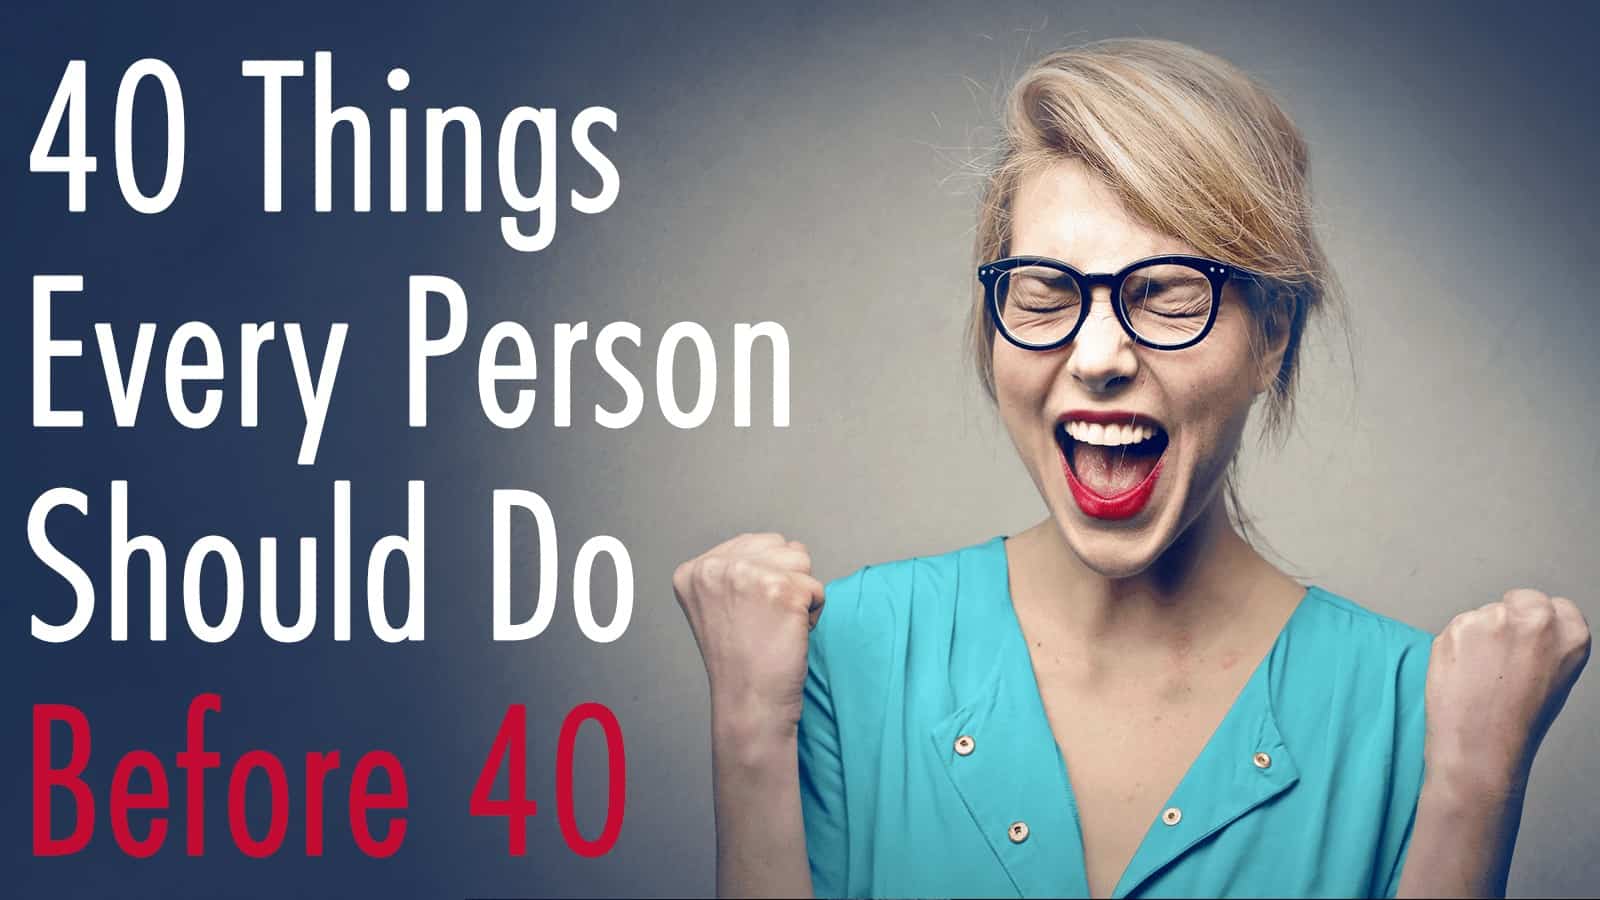 40 Things Every Person Should Do Before 40